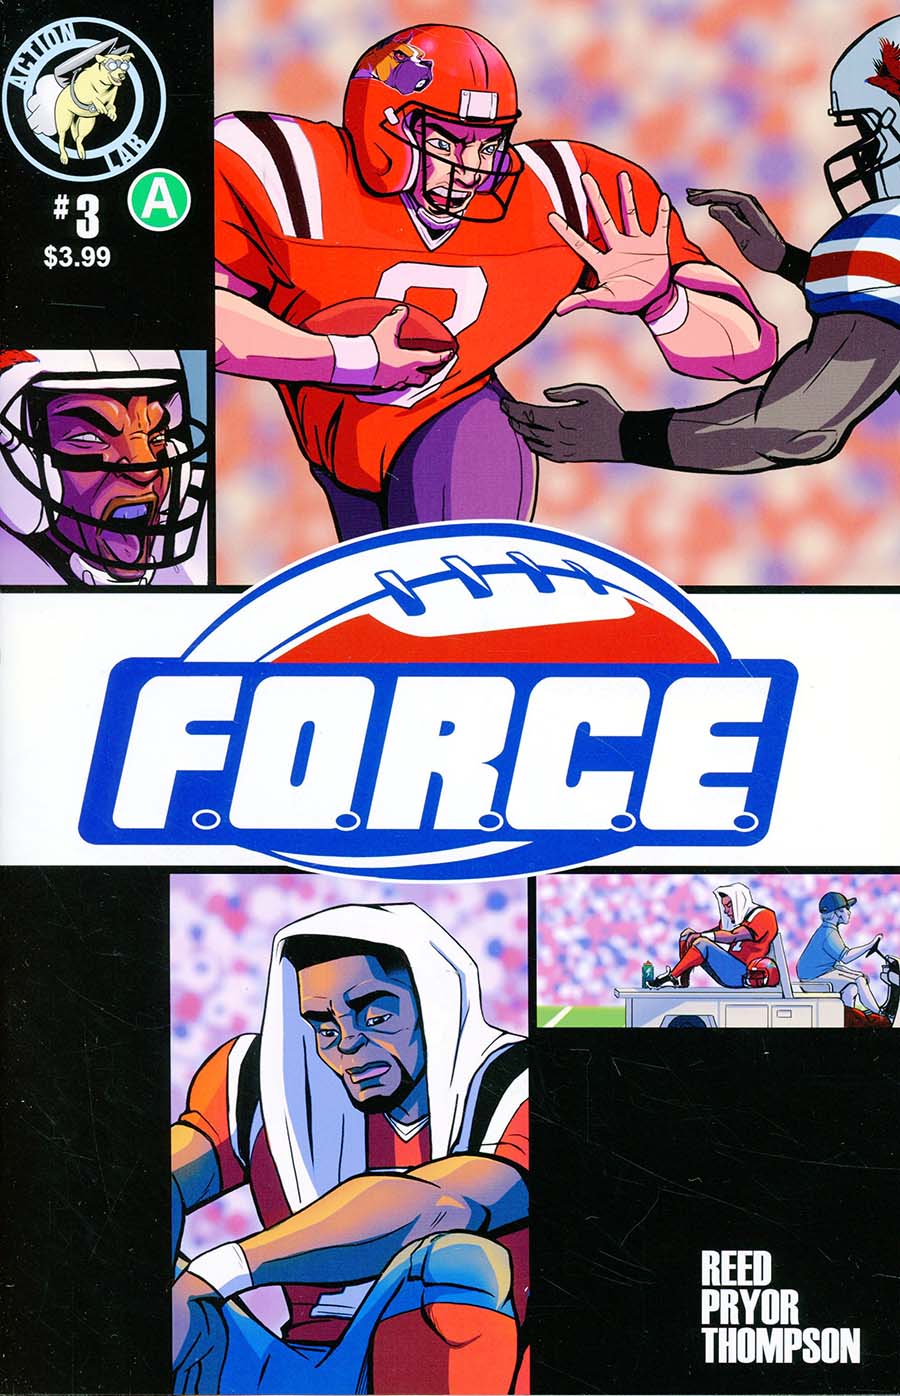 Force #3